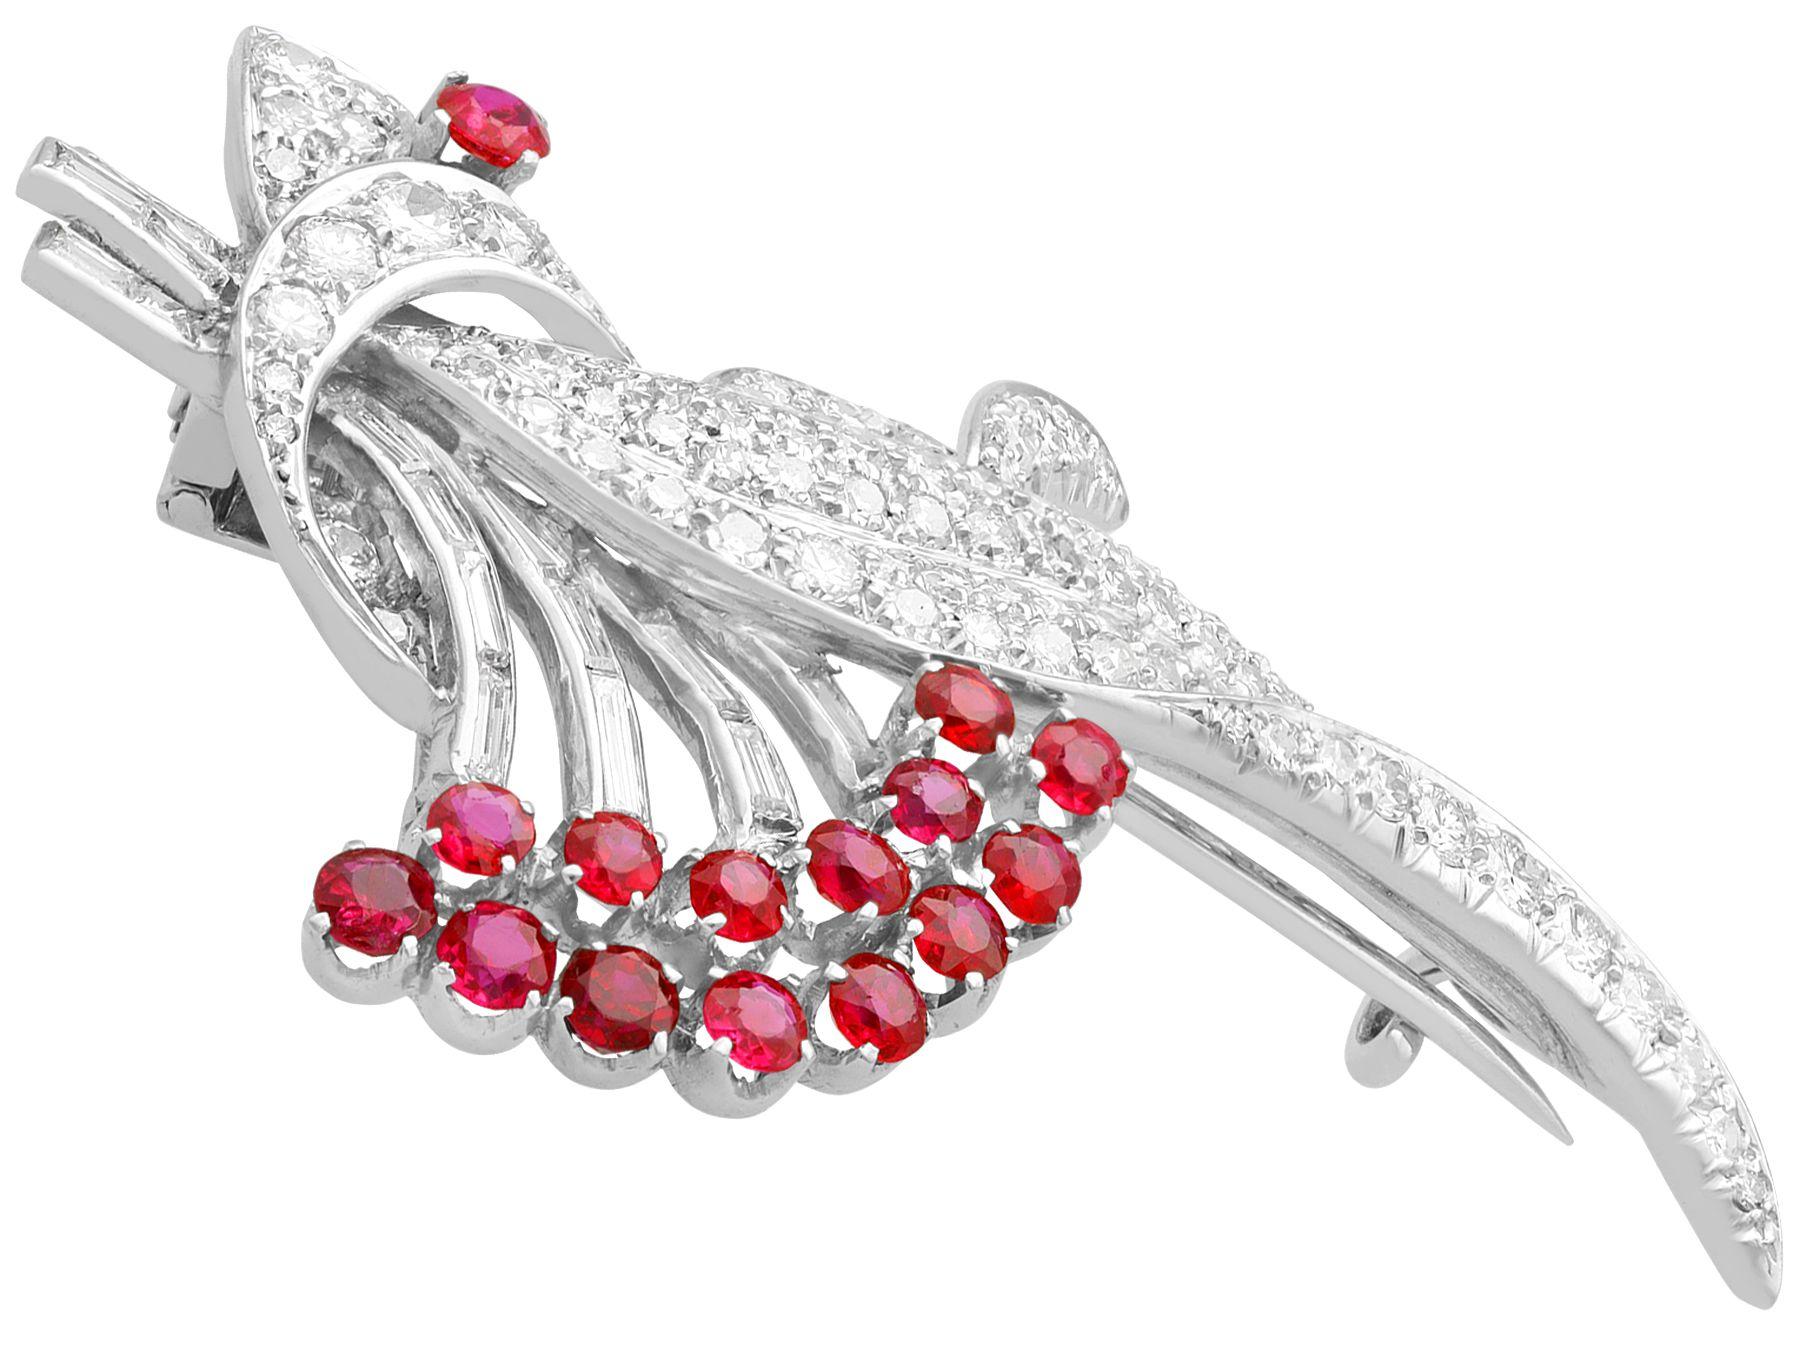 Vintage 4.32 Carat Diamond and 1.93 Carat Ruby Platinum Brooch In Excellent Condition For Sale In Jesmond, Newcastle Upon Tyne